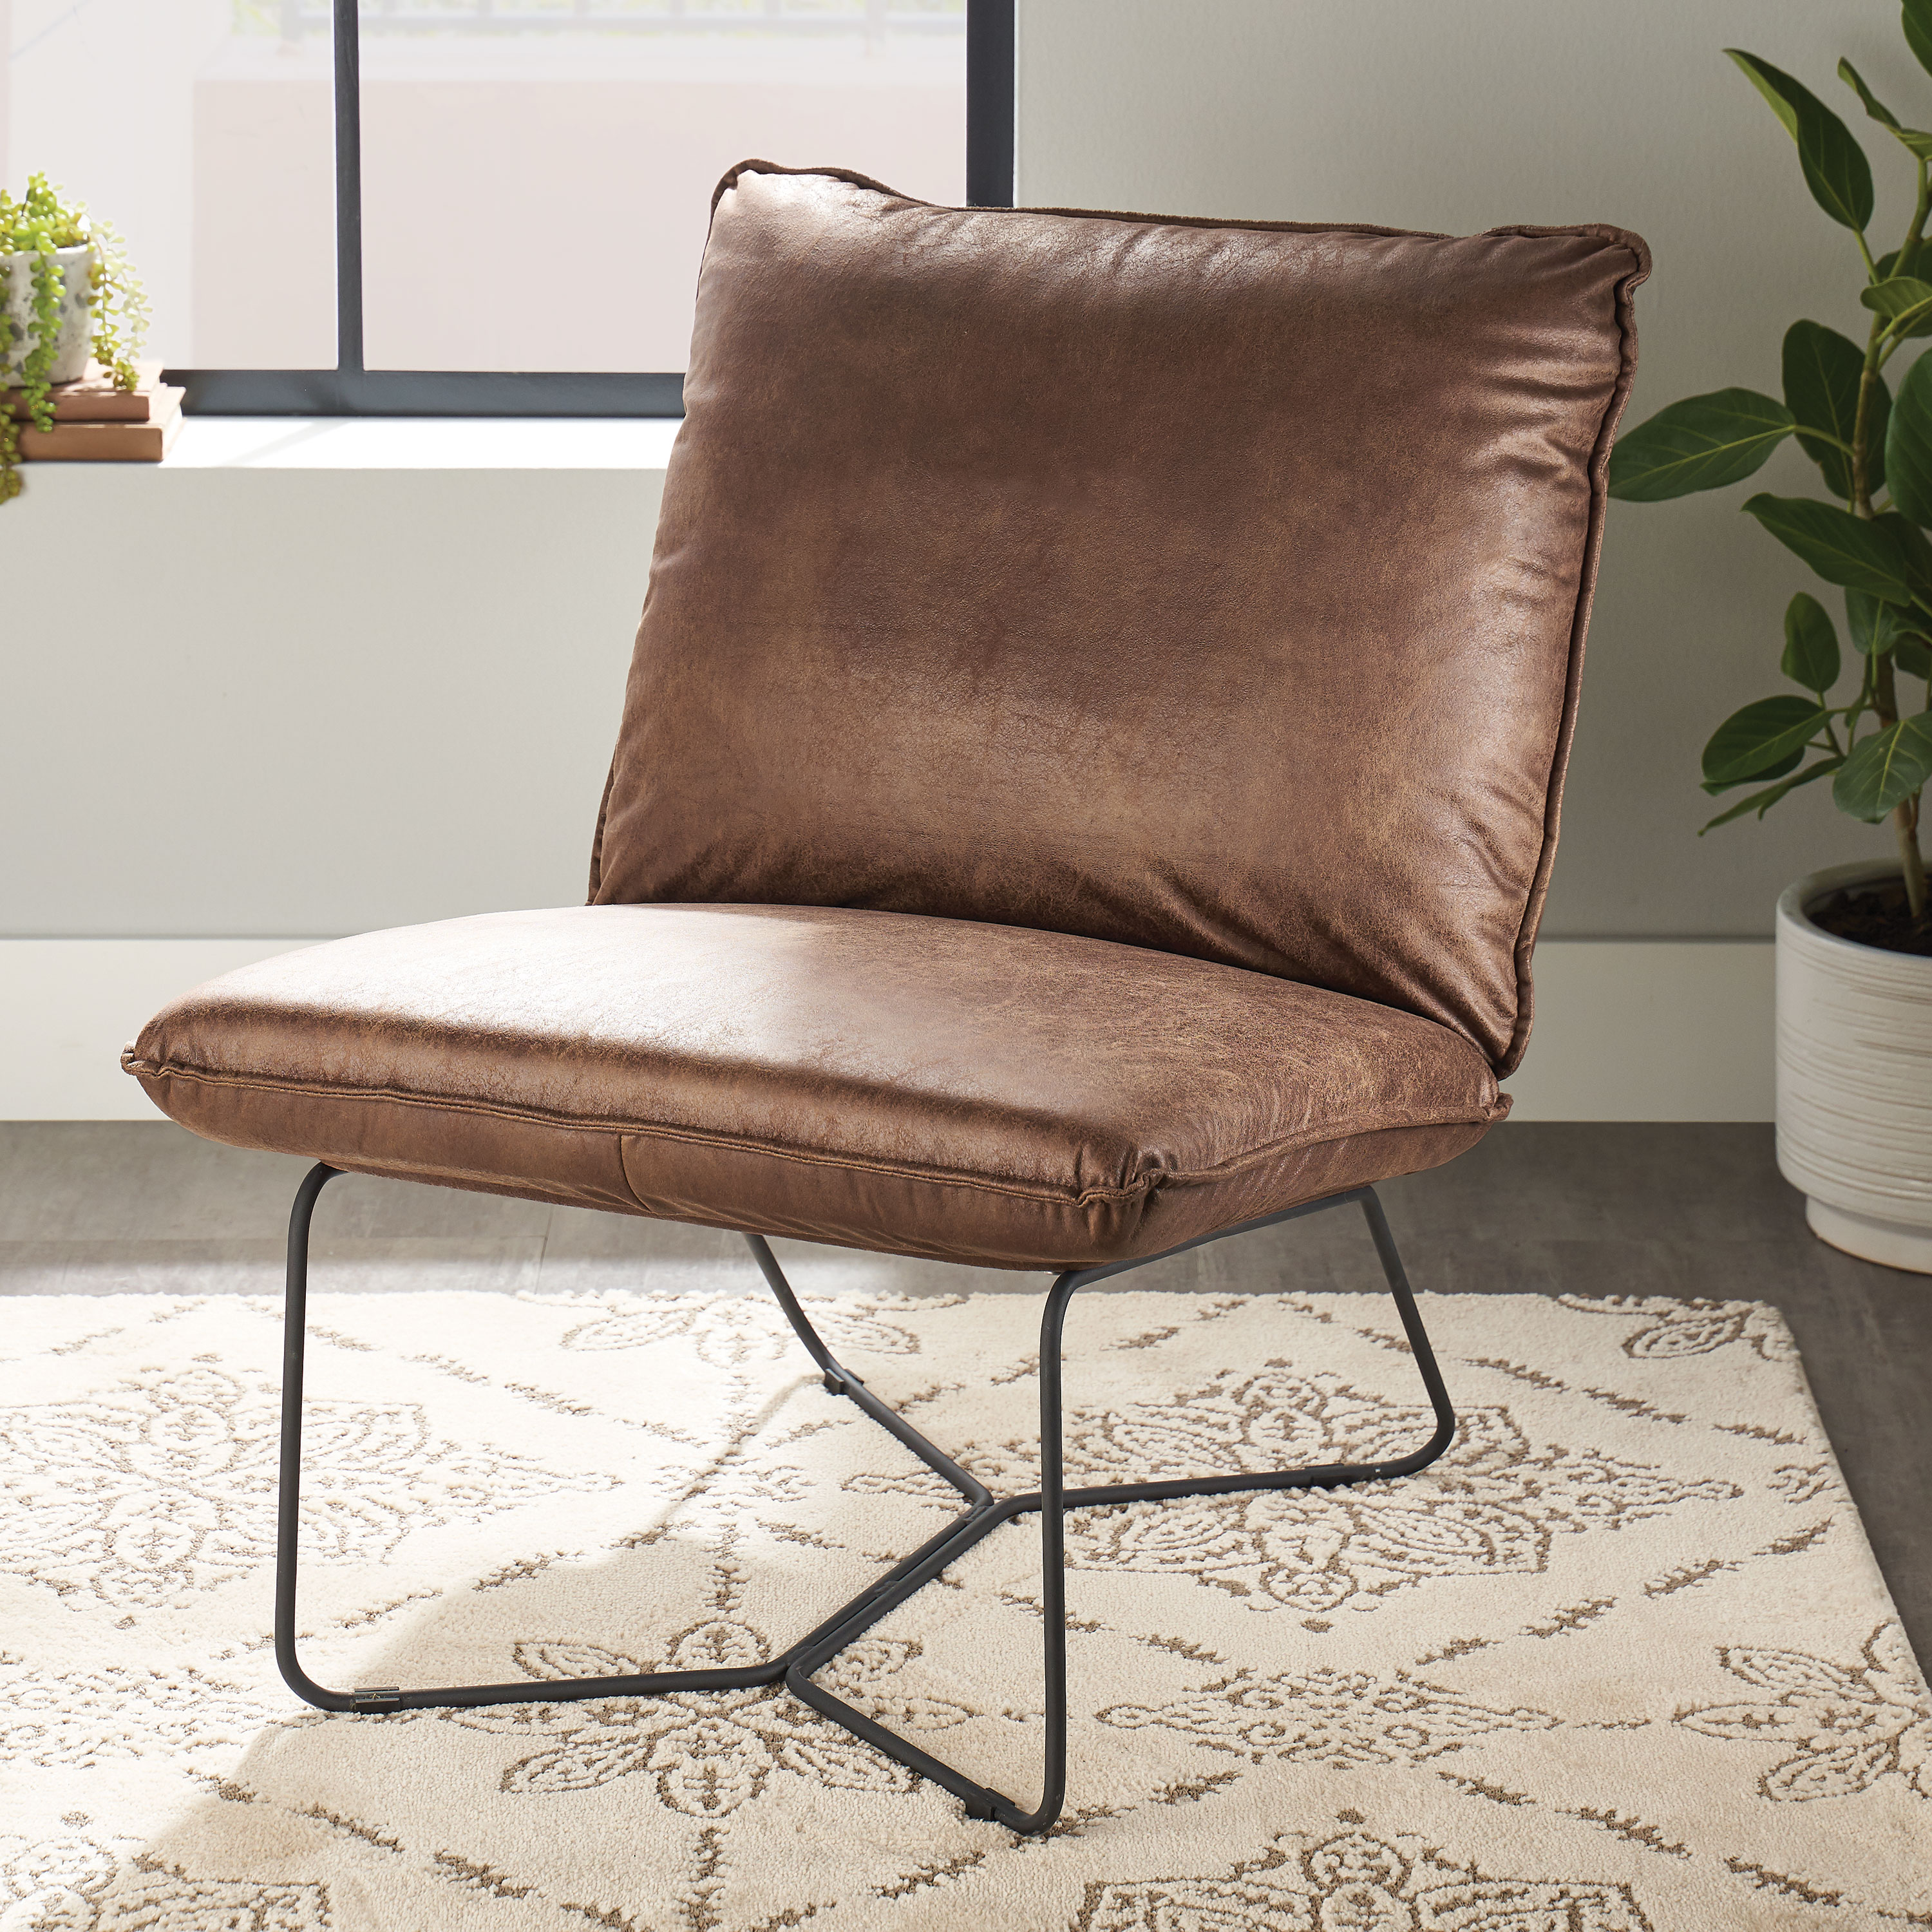 Better Homes & Gardens Pillow Lounge, Accent Chair, Brown Faux Leather Upholstery - image 1 of 9